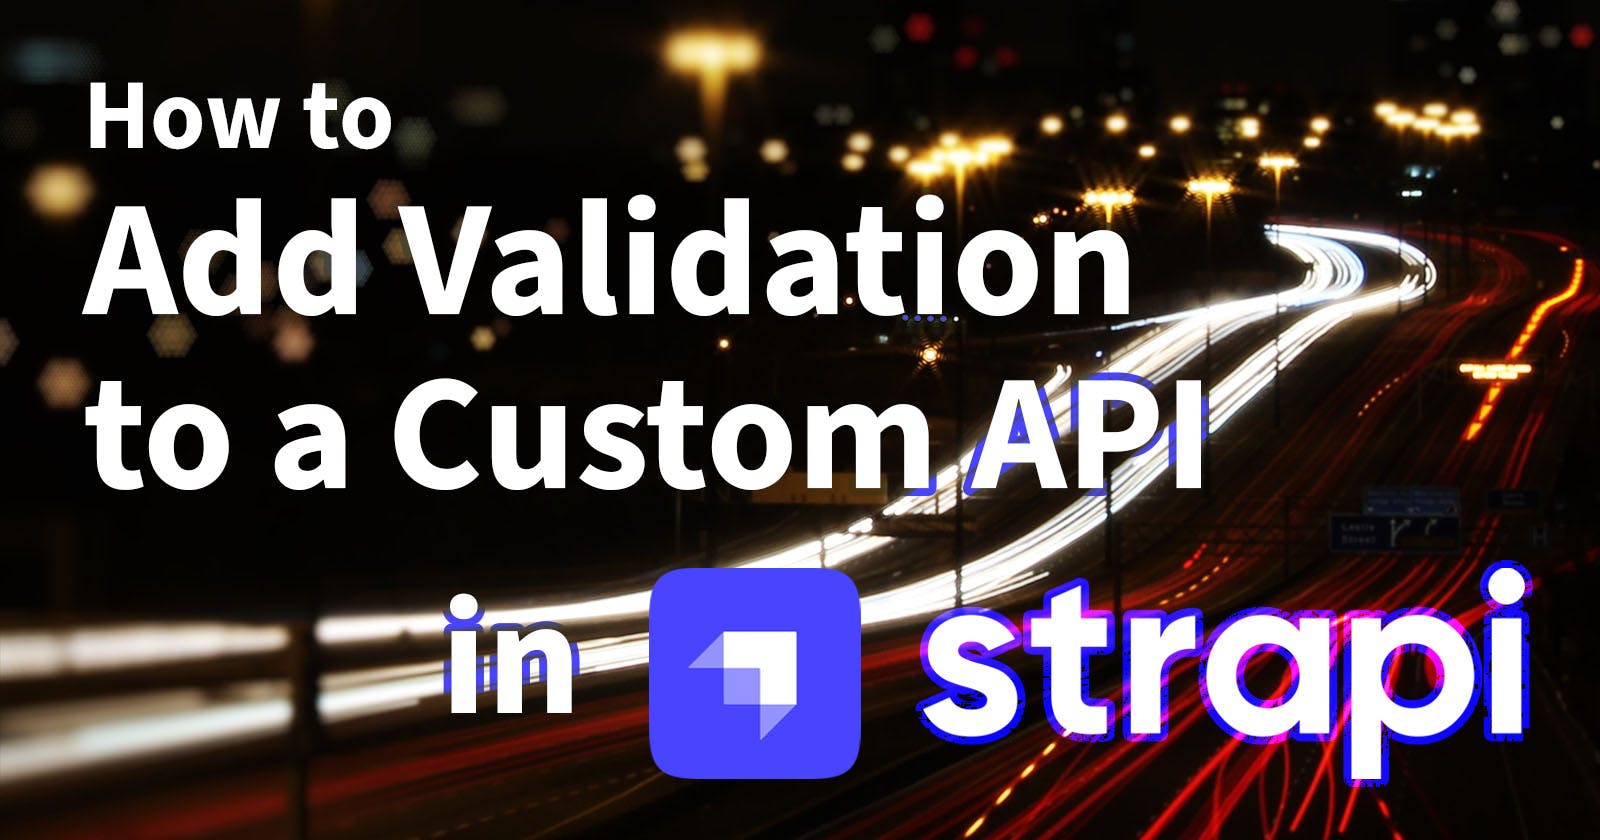 How to add validation to a custom API in Strapi?